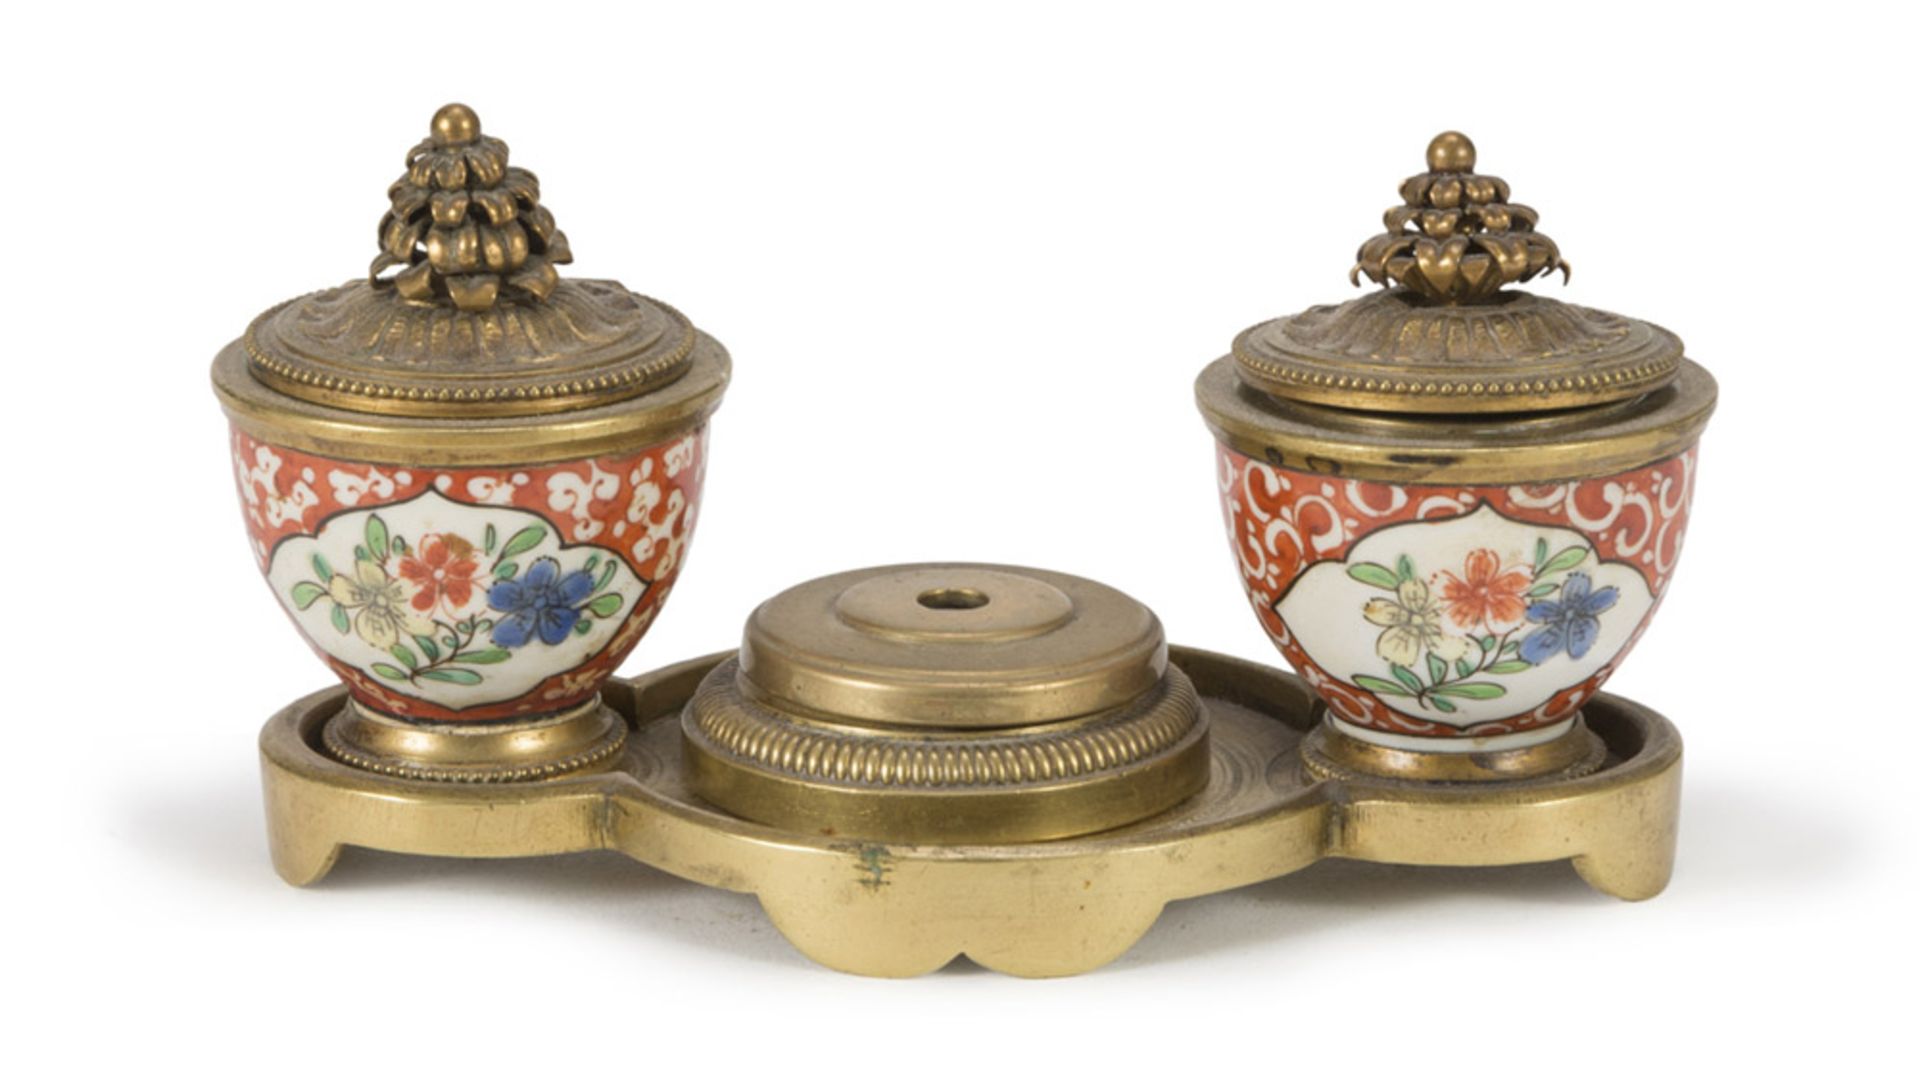 SMALL BRONZE AND PORCELAIN INKWELL, PROBABLY FRANCE LATE 18TH CENTURY